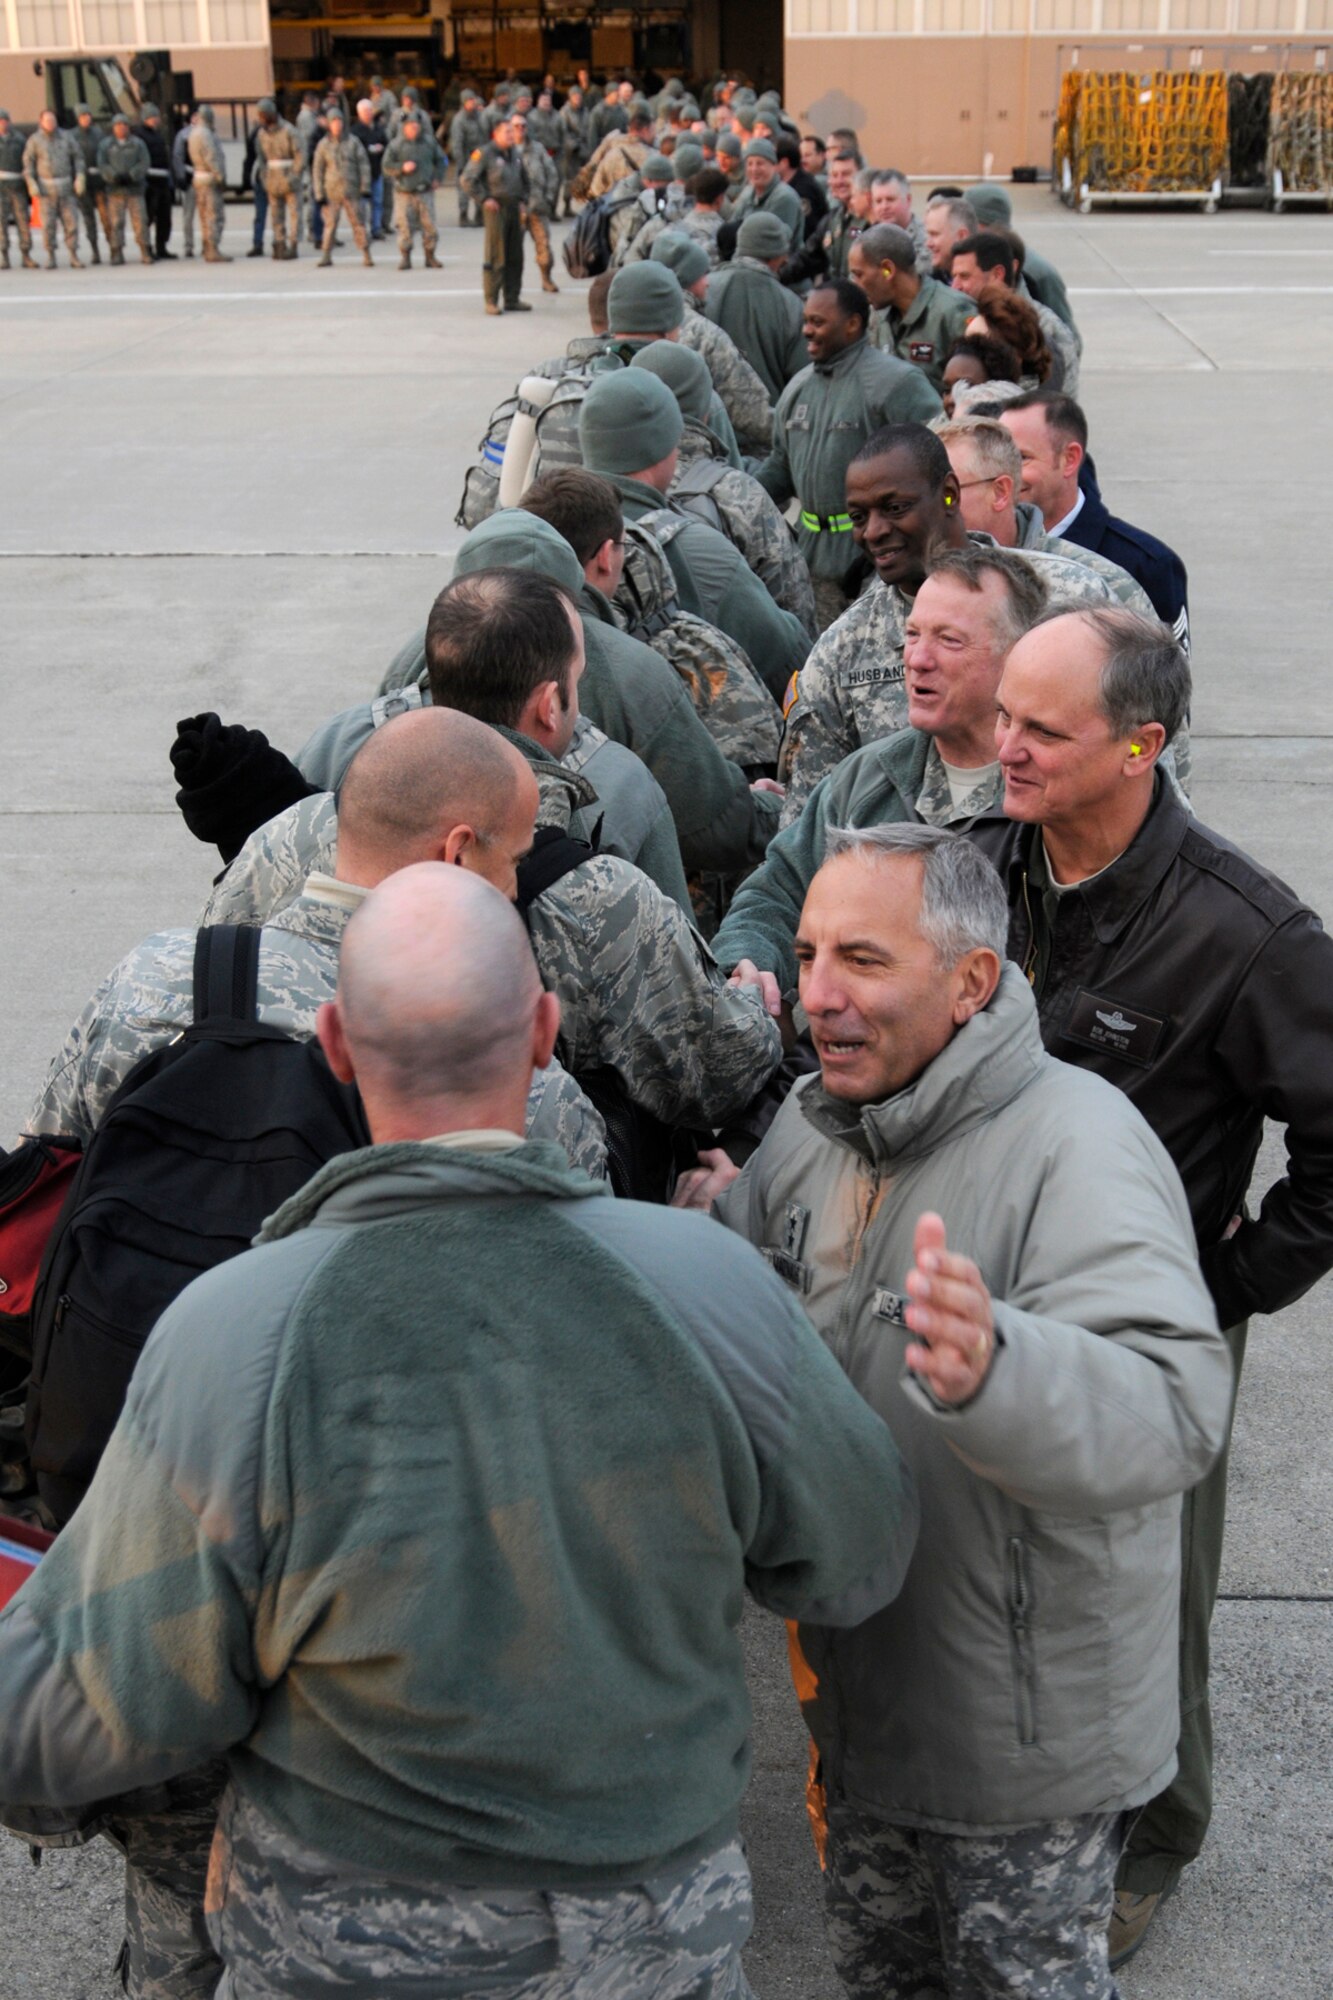 Airmen from the 127th Wing are greeted by Major General Gregory Vadnais (front right), the Michigan Adjutant General, as they arrive at Selfridge Air National Guard Base, Mich., Jan. 9, 2012, after a 4-month deployment to Kandahar Airfield in Afghanistan. The Airmen, all members of the 127th Wing at Selfridge, flew and maintained the A-10 Thunderbolt II attack aircraft while in Afghanistan. (U.S. Air Force photo by TSgt Dave Kujawa)